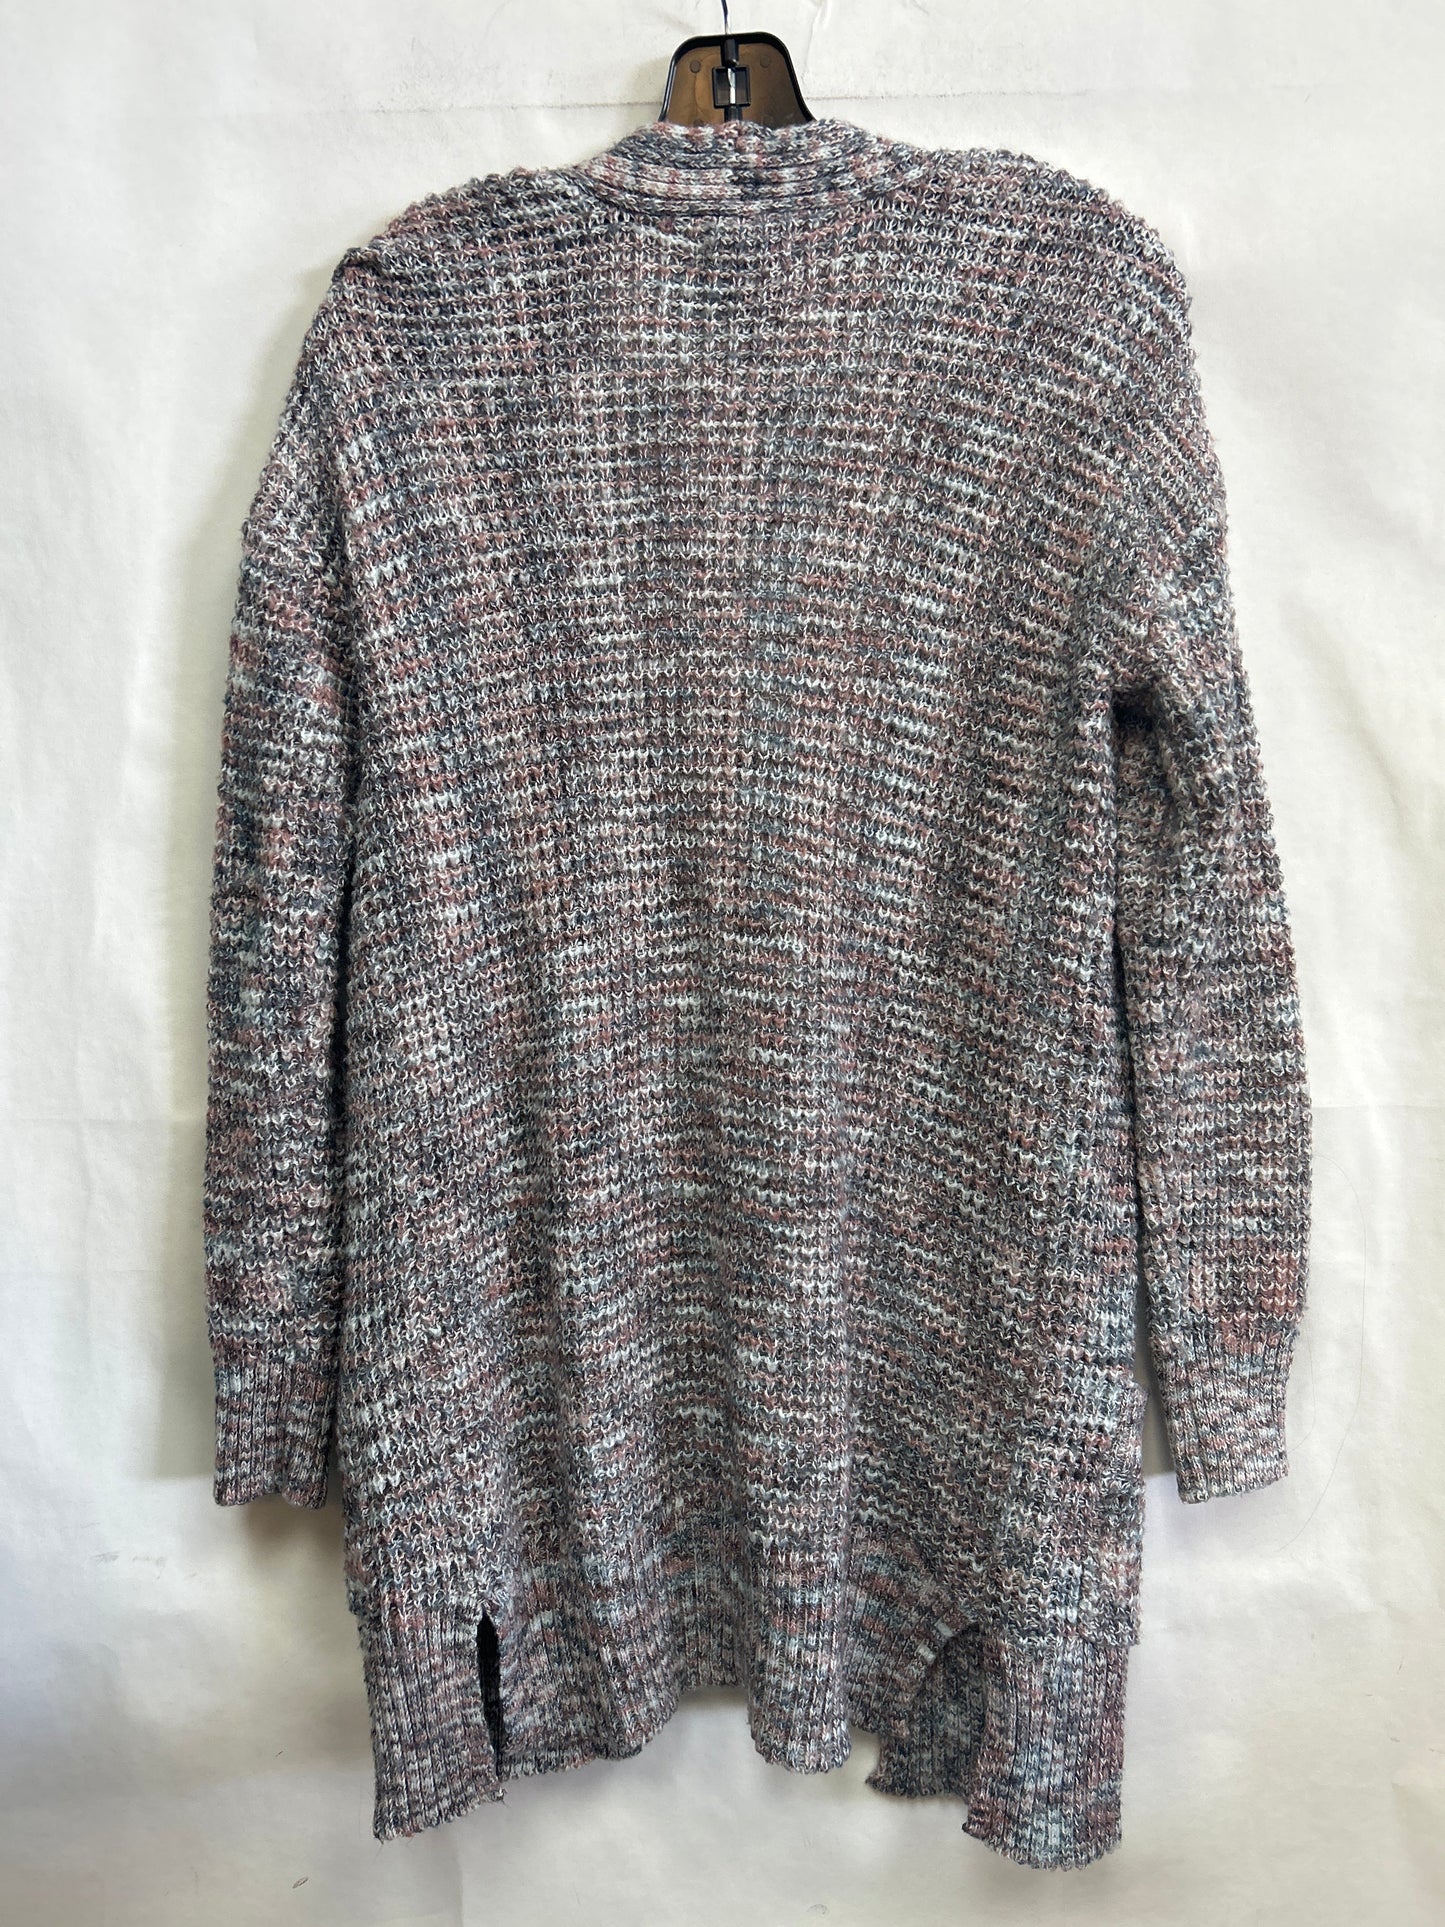 Sweater Cardigan By Maurices  Size: M